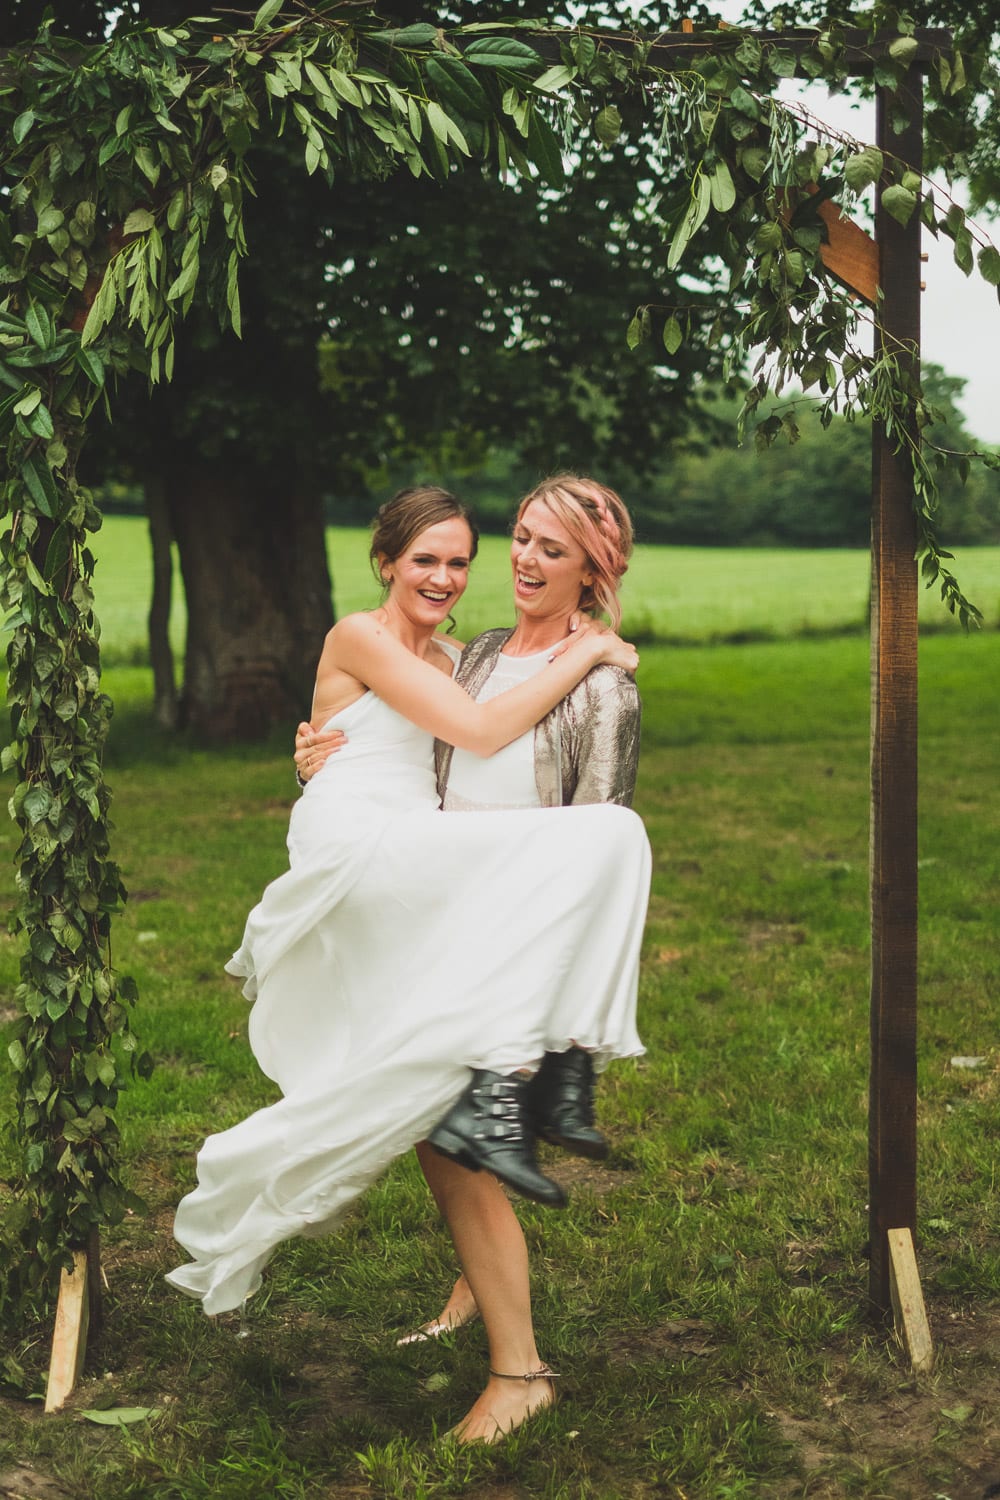 East Sussex Rainy Festival Wedding photographer best woman and bride